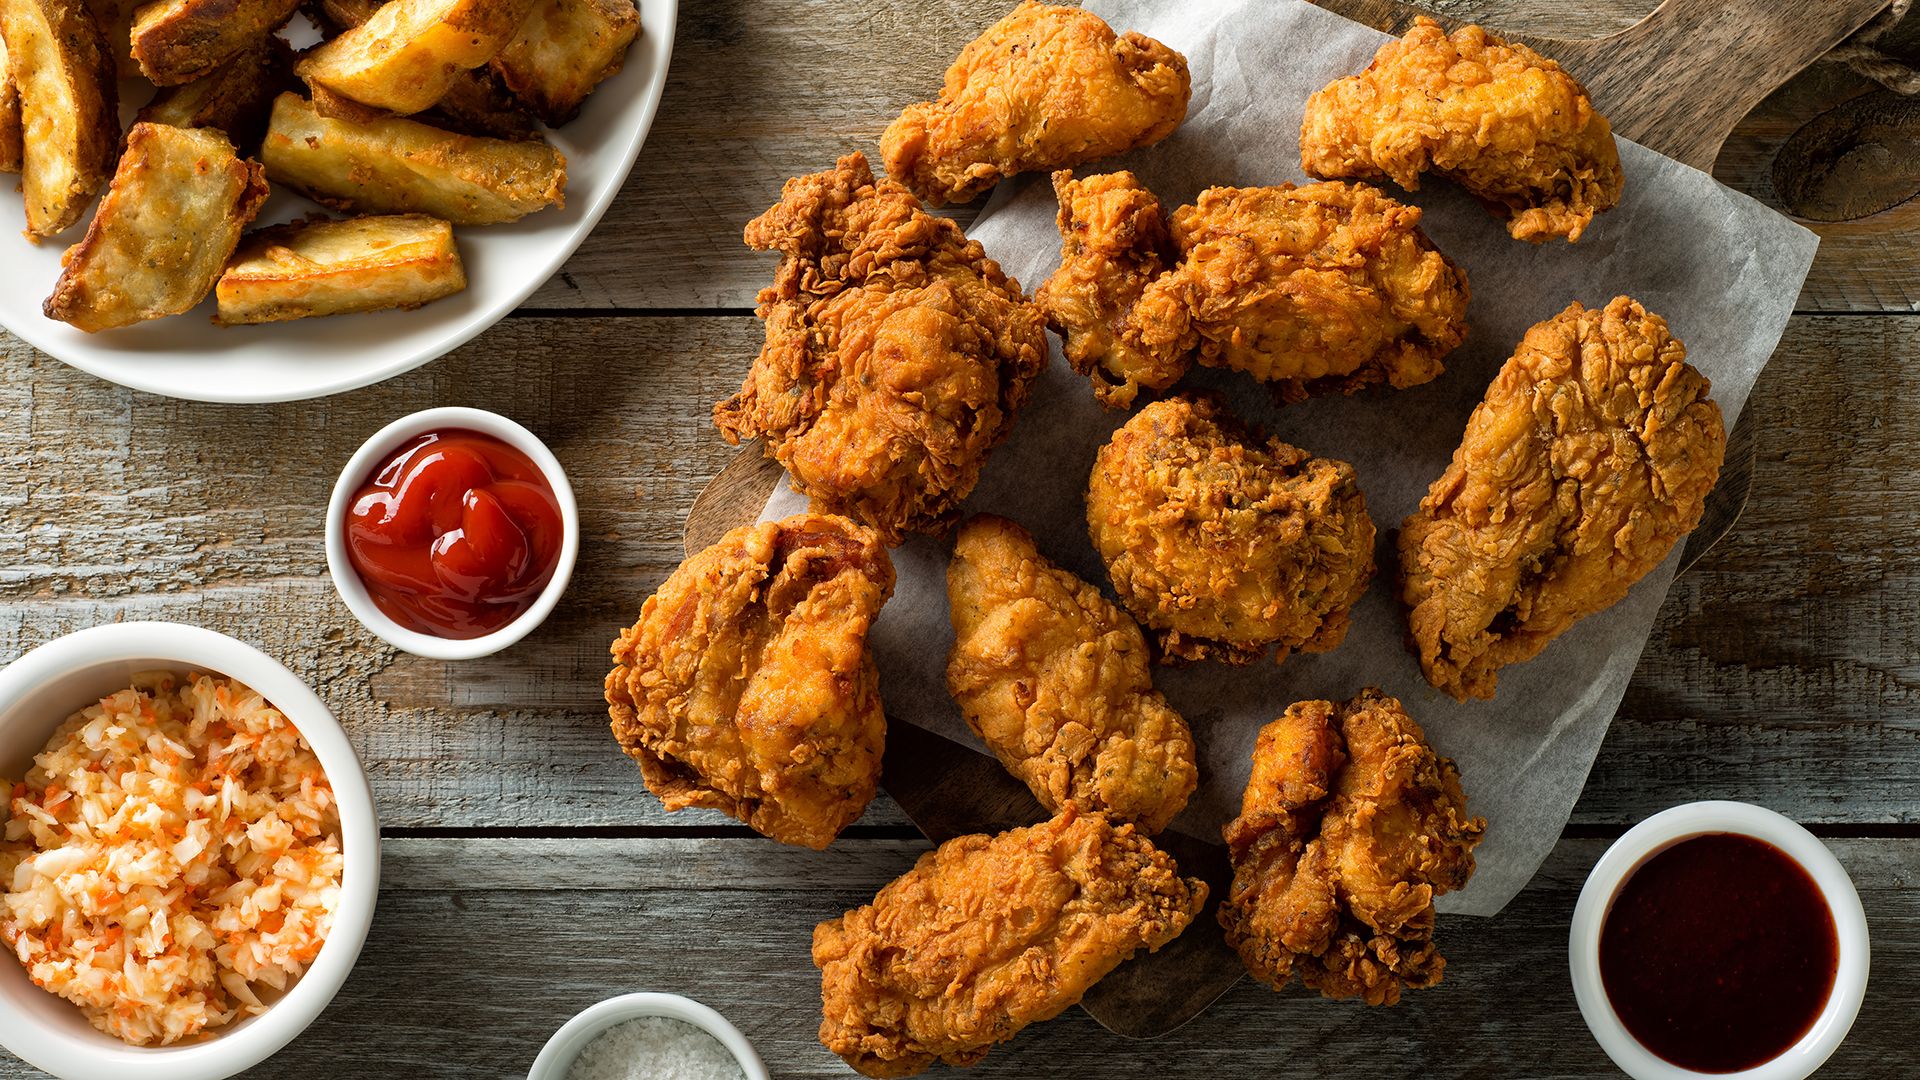 KFC is About to Reveal Their Secret Recipe to the World